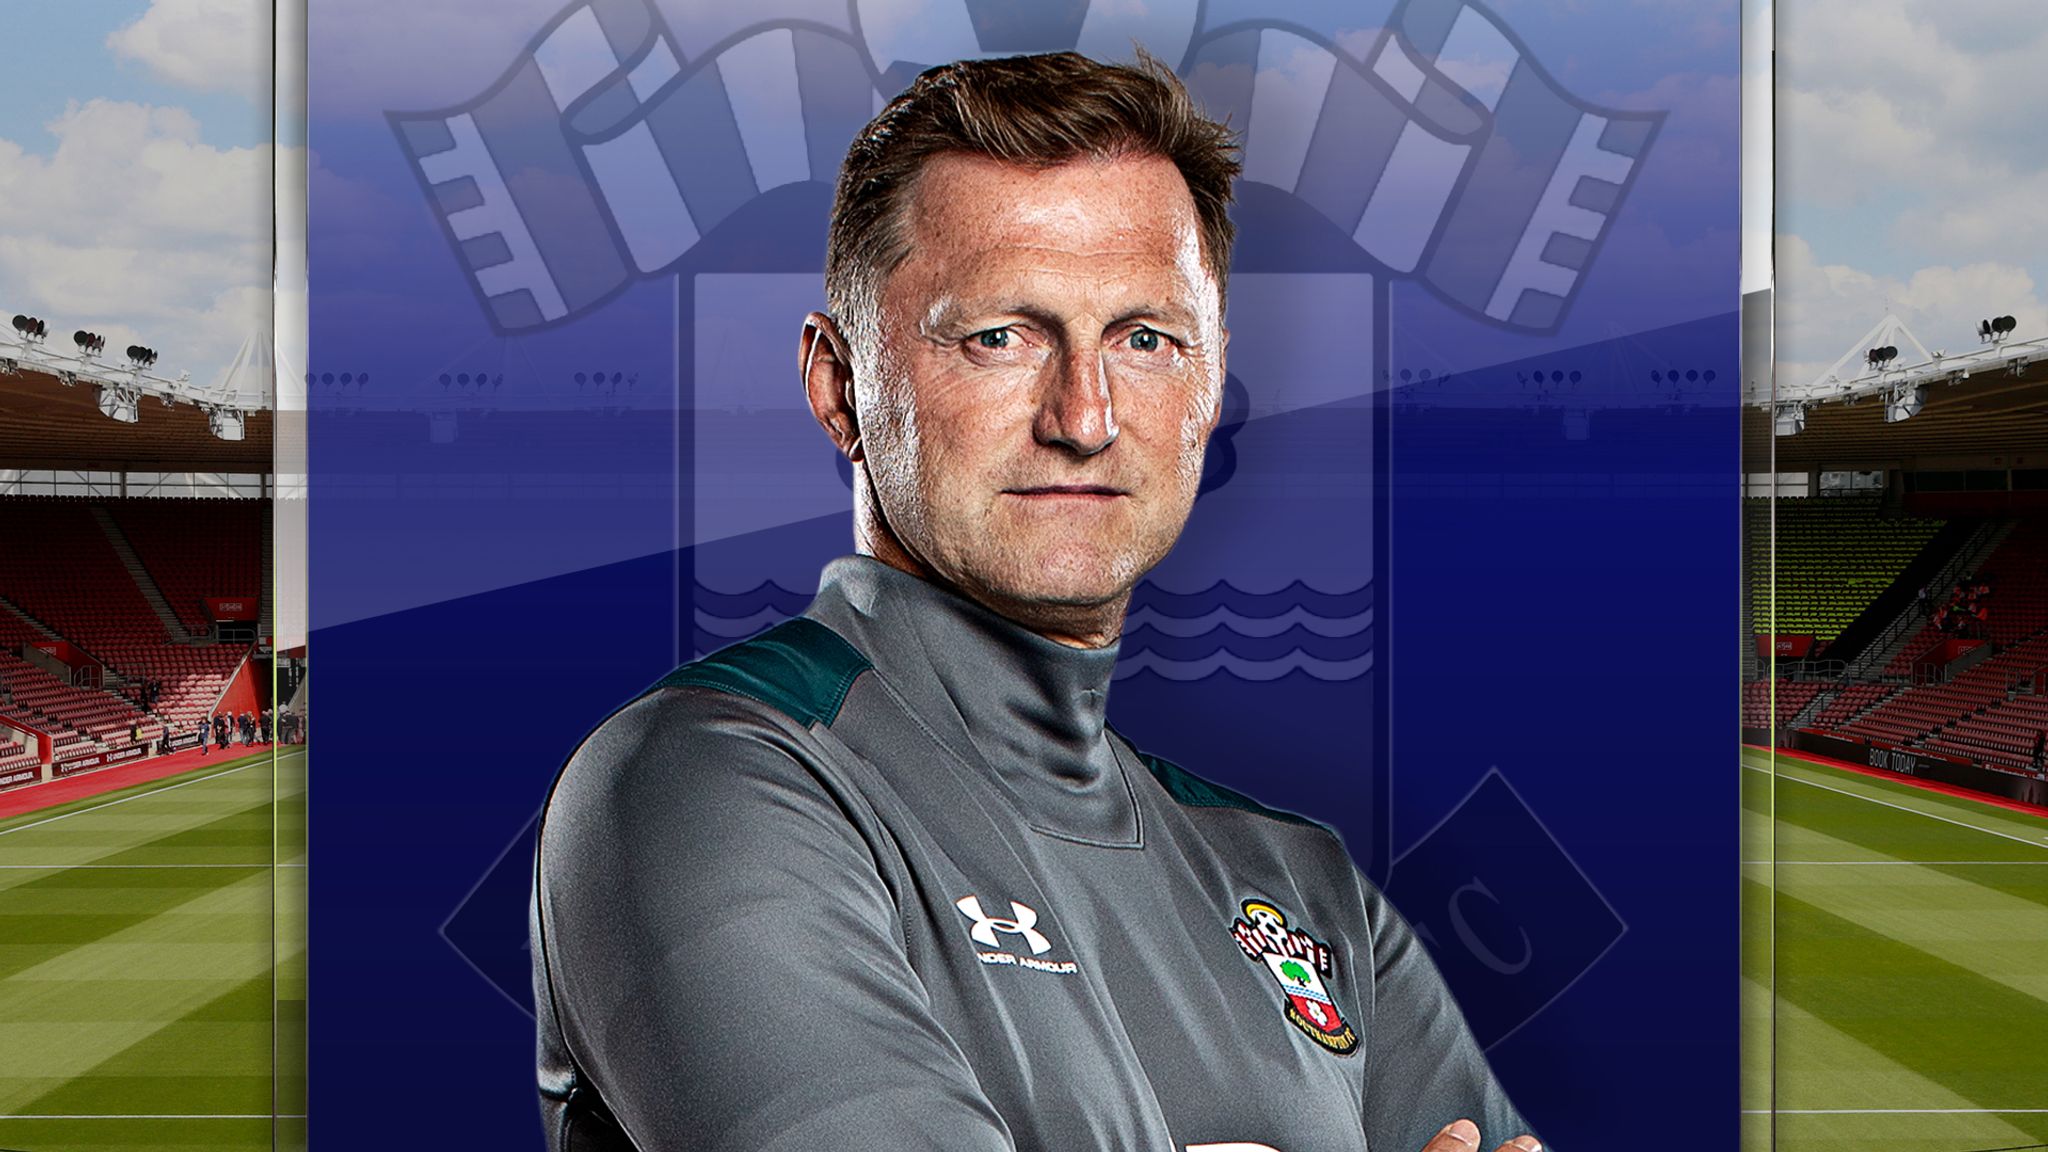 Ralph Hasenhuttl From Youth League To Premier League With